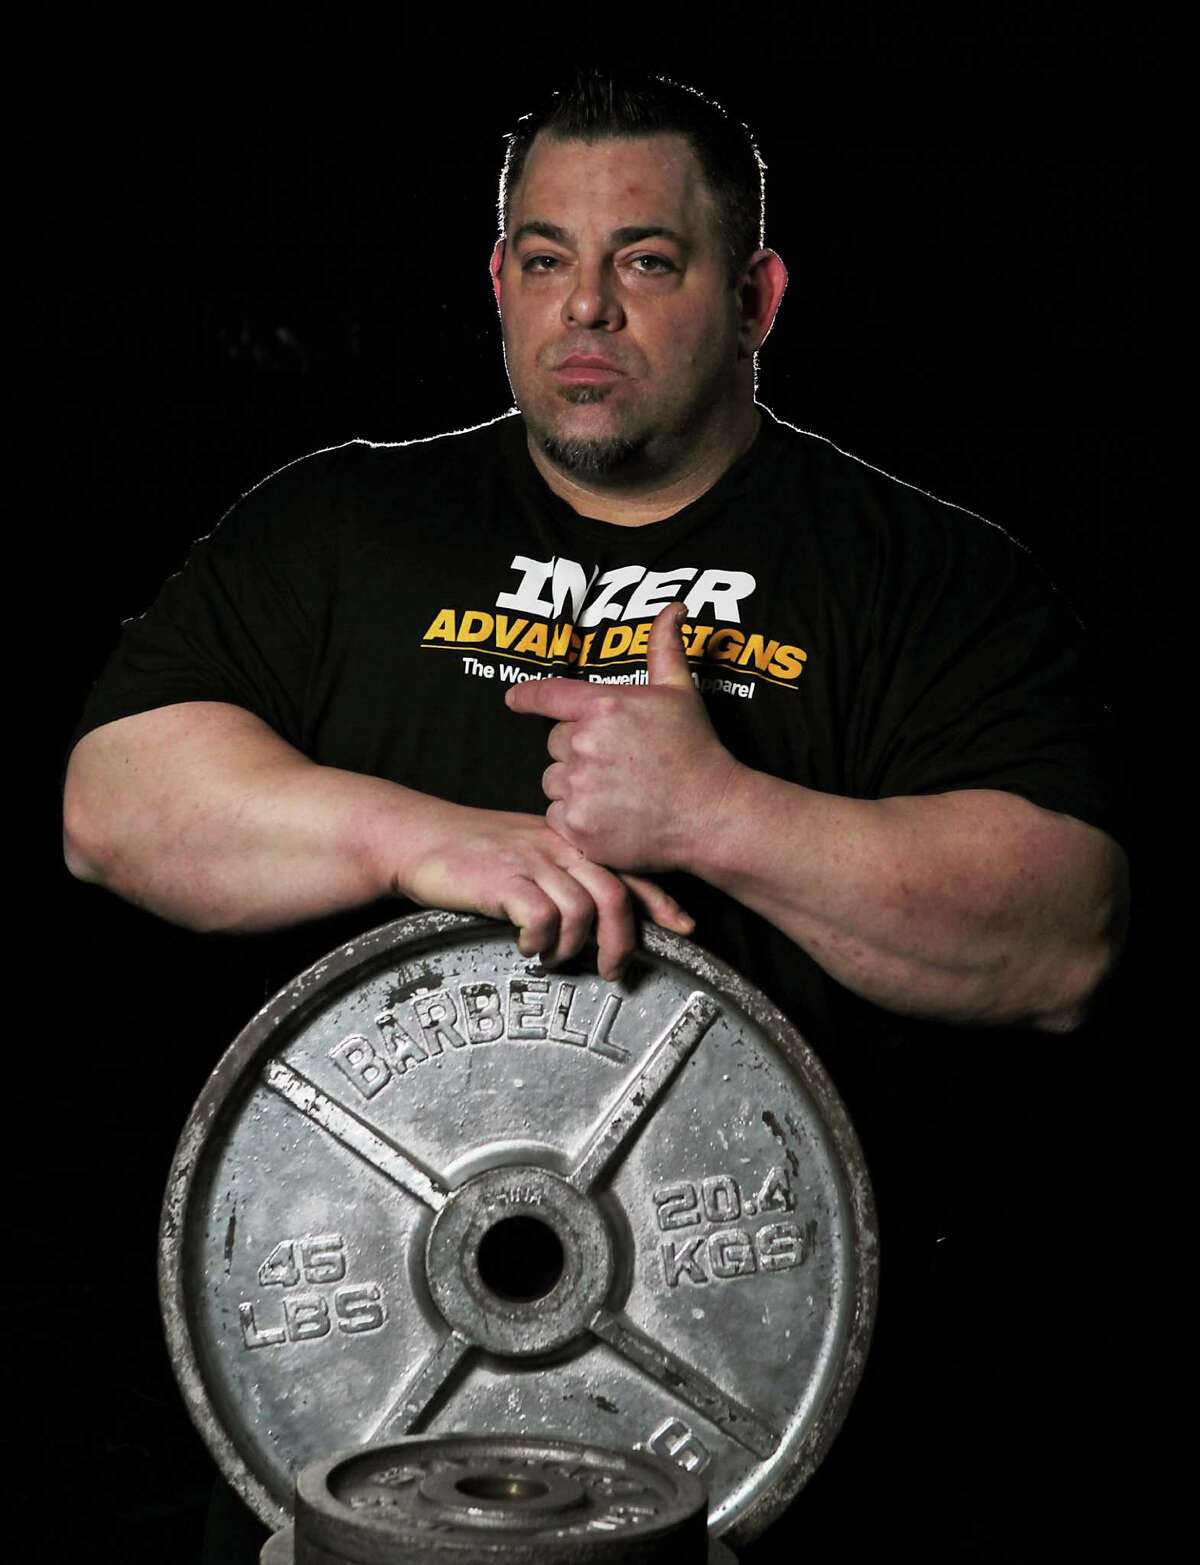 Monster Gym's Tiny Meeker, who recently became the first man in the world to bench press over 1,100 pounds, poses for a portrait on Sunday in Kingwood.